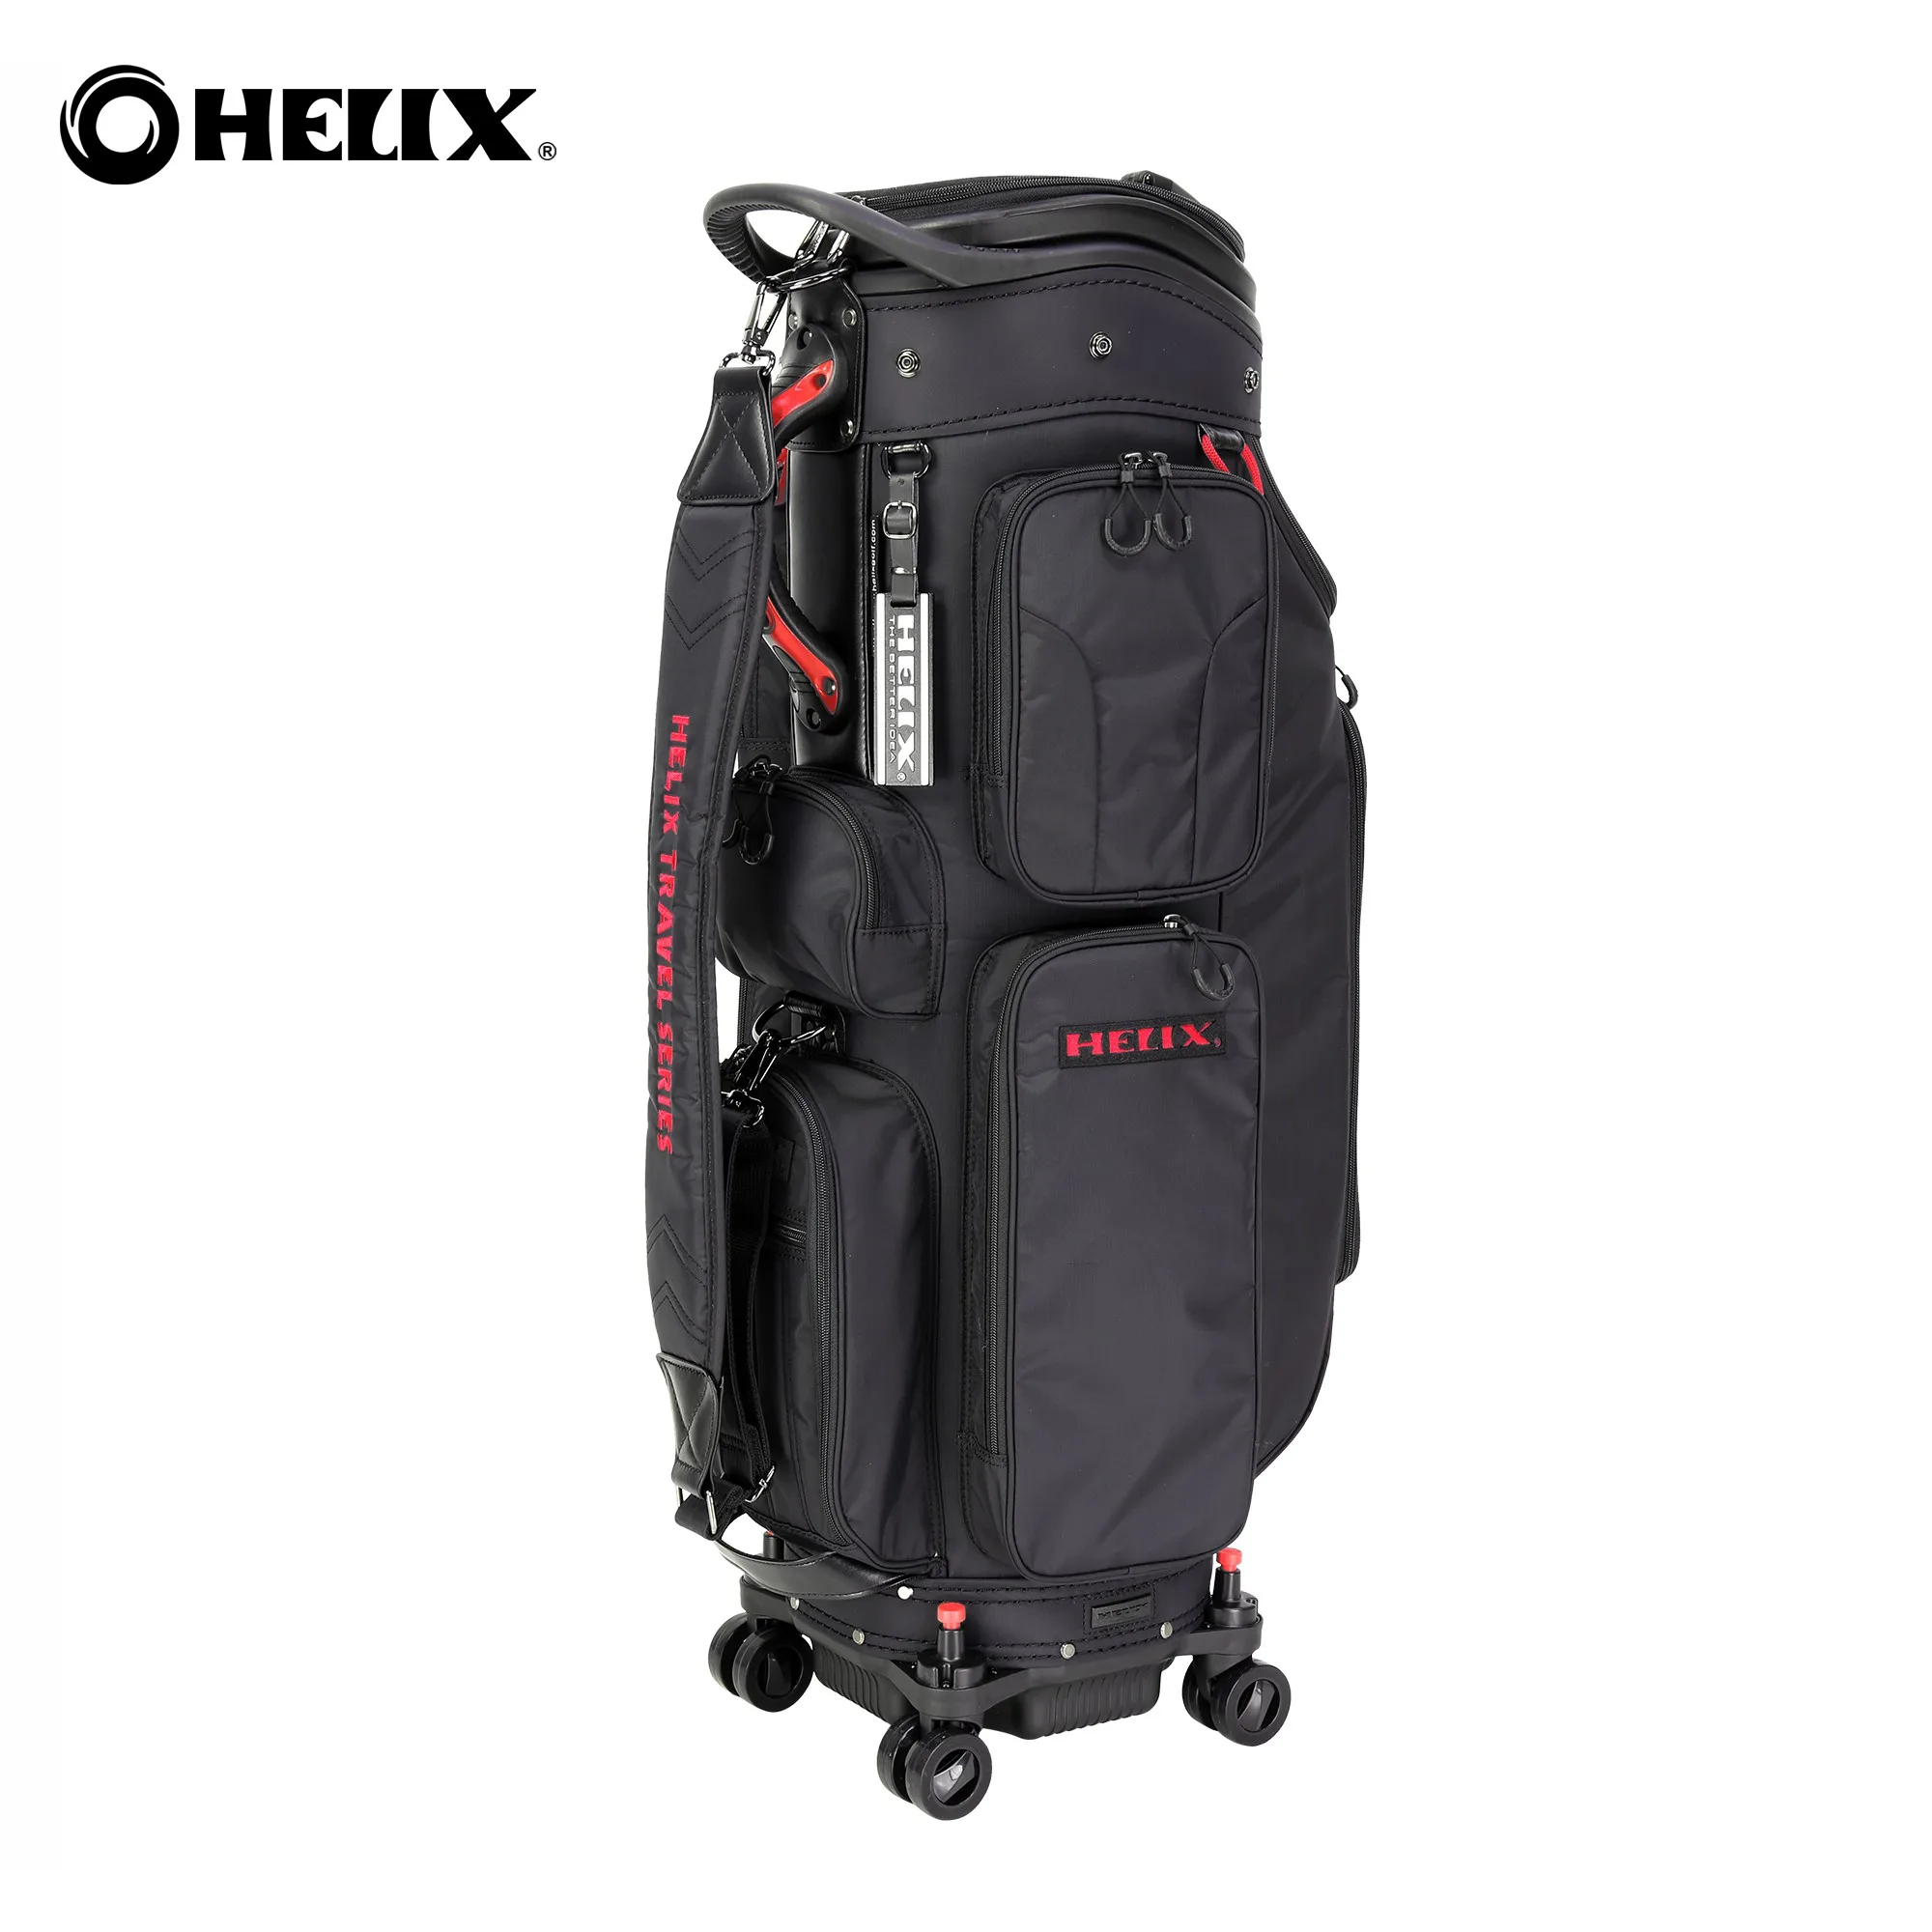 Helix durable oem logo travel golf bag with wheels with shoulder strap travelling bags ladies and men